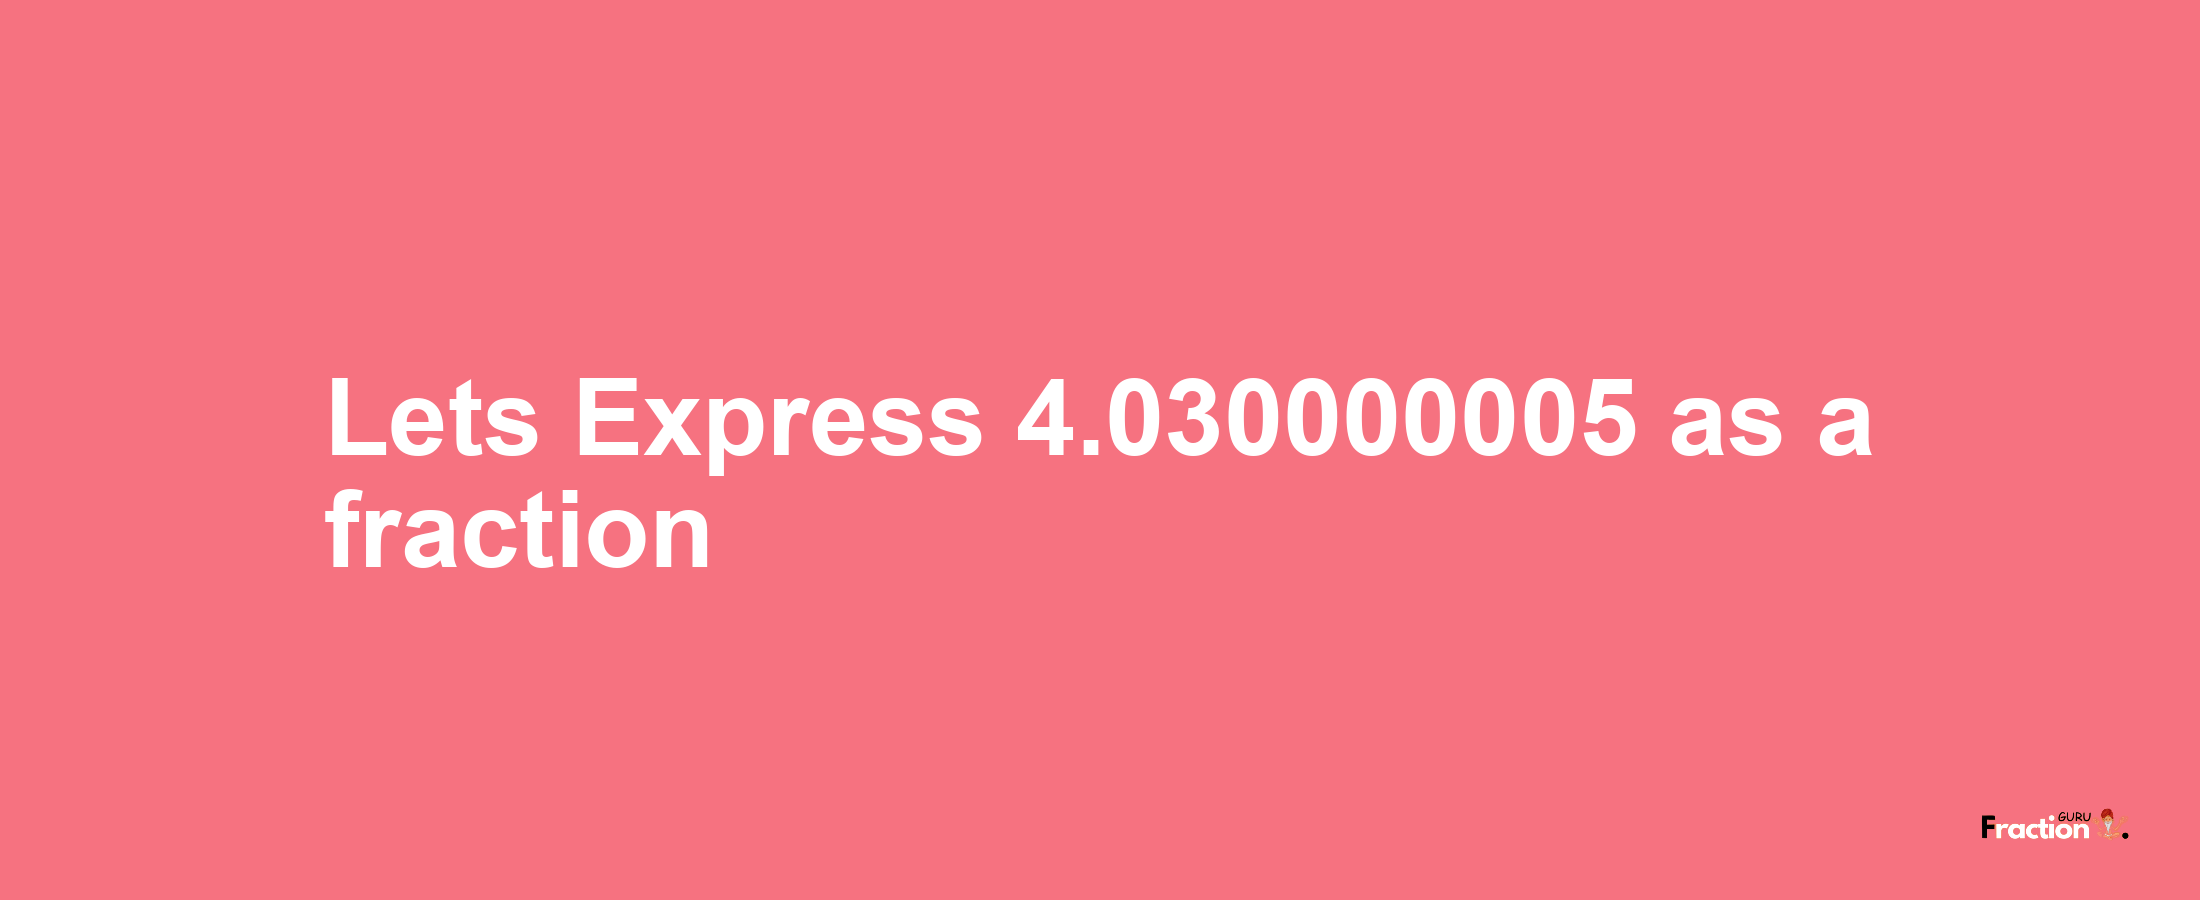 Lets Express 4.030000005 as afraction